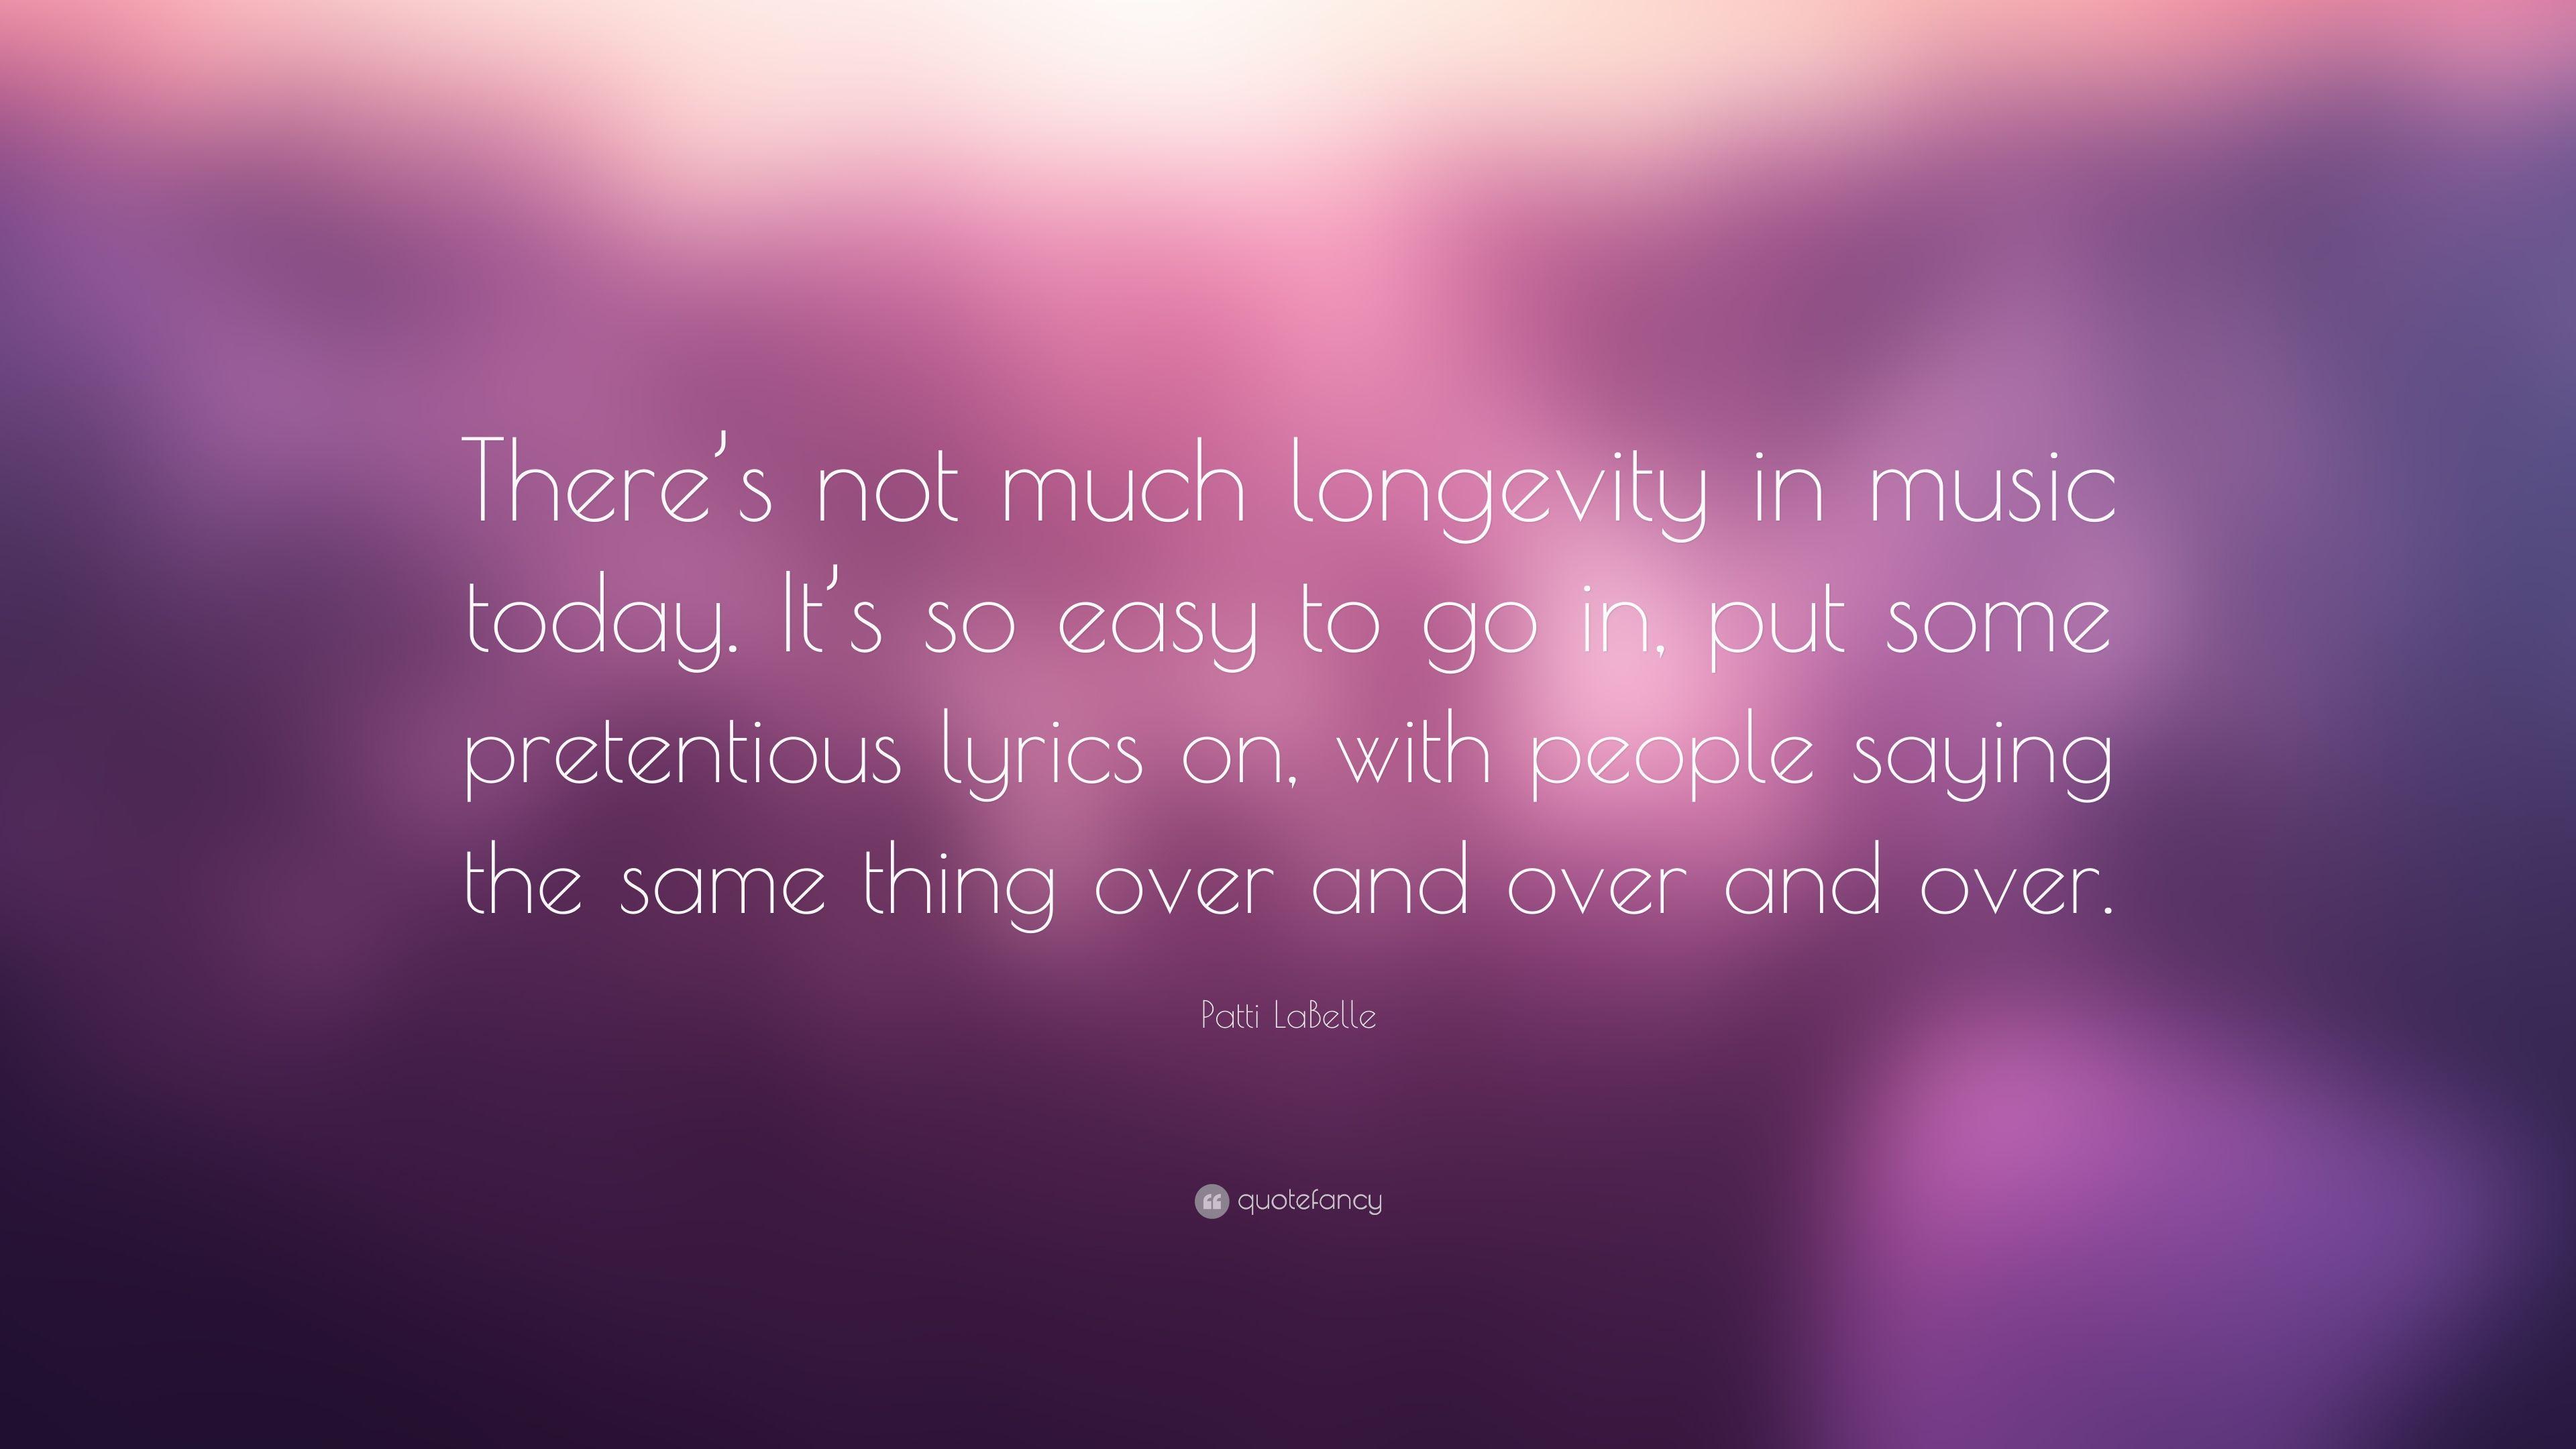 Patti LaBelle Quote: “There's not much longevity in music today